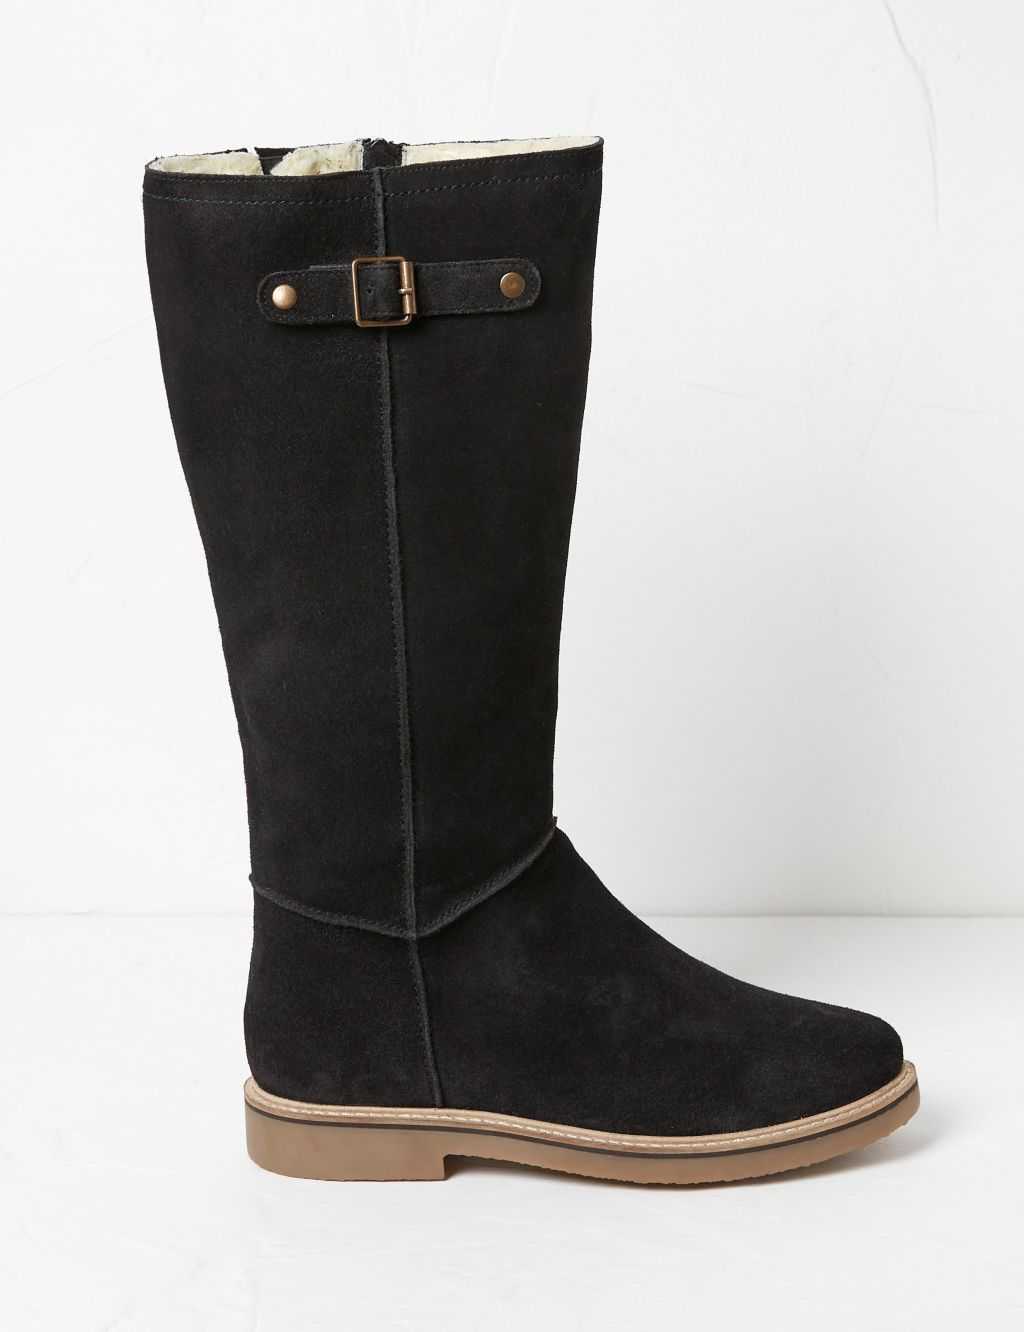 Suede Buckle Knee High Boots image 1